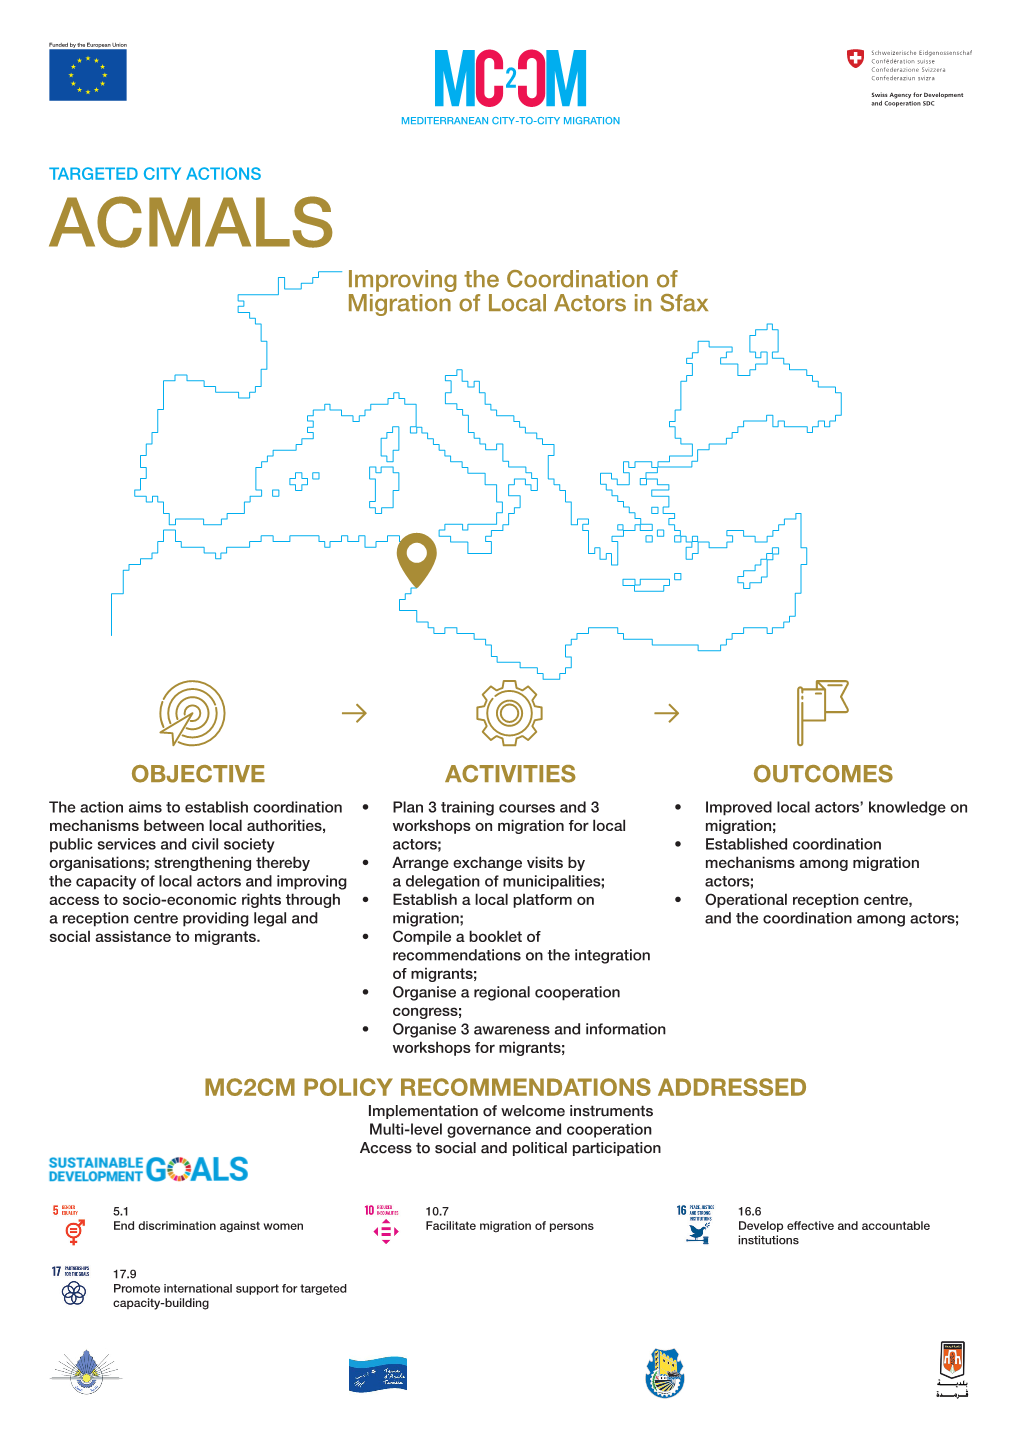 ACMALS Improving the Coordination of Migration of Local Actors in Sfax